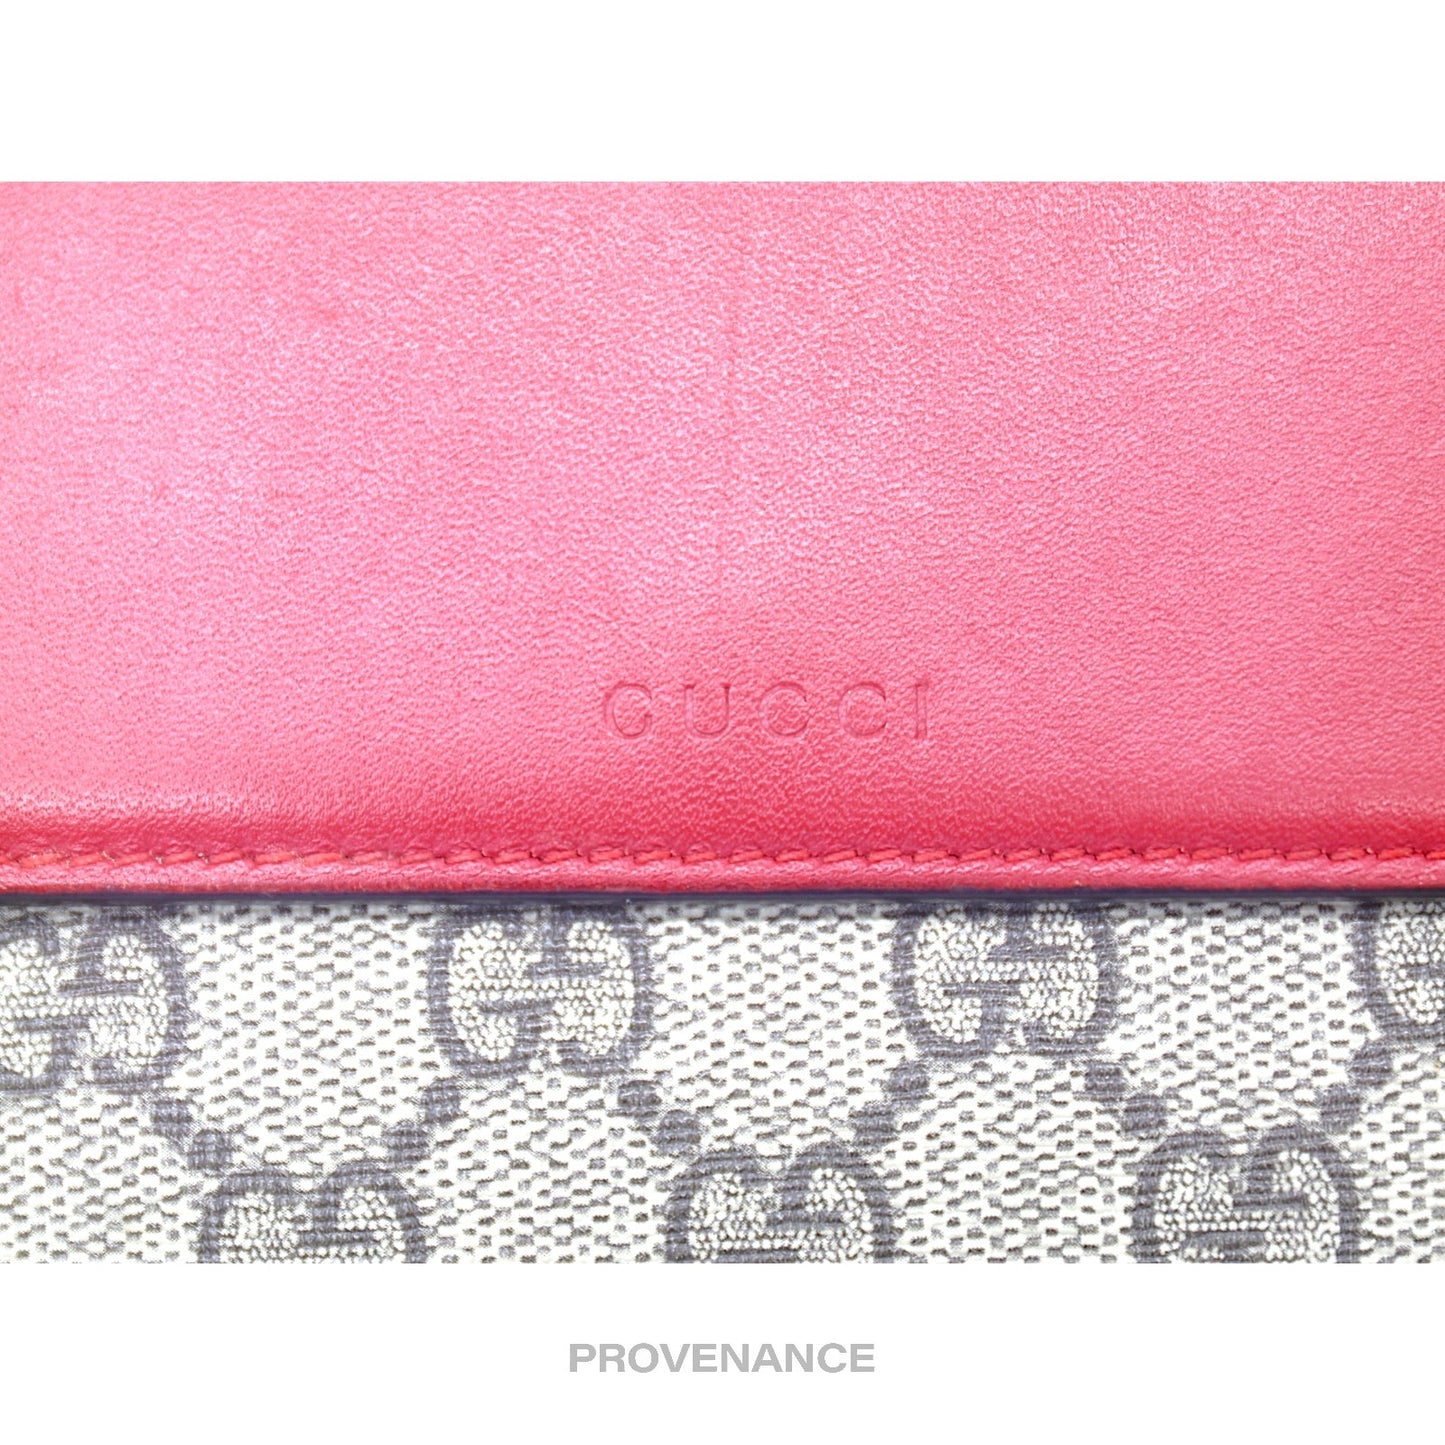 🔴 Gucci Trifold Snap Wallet - GG Supreme Red/Pink